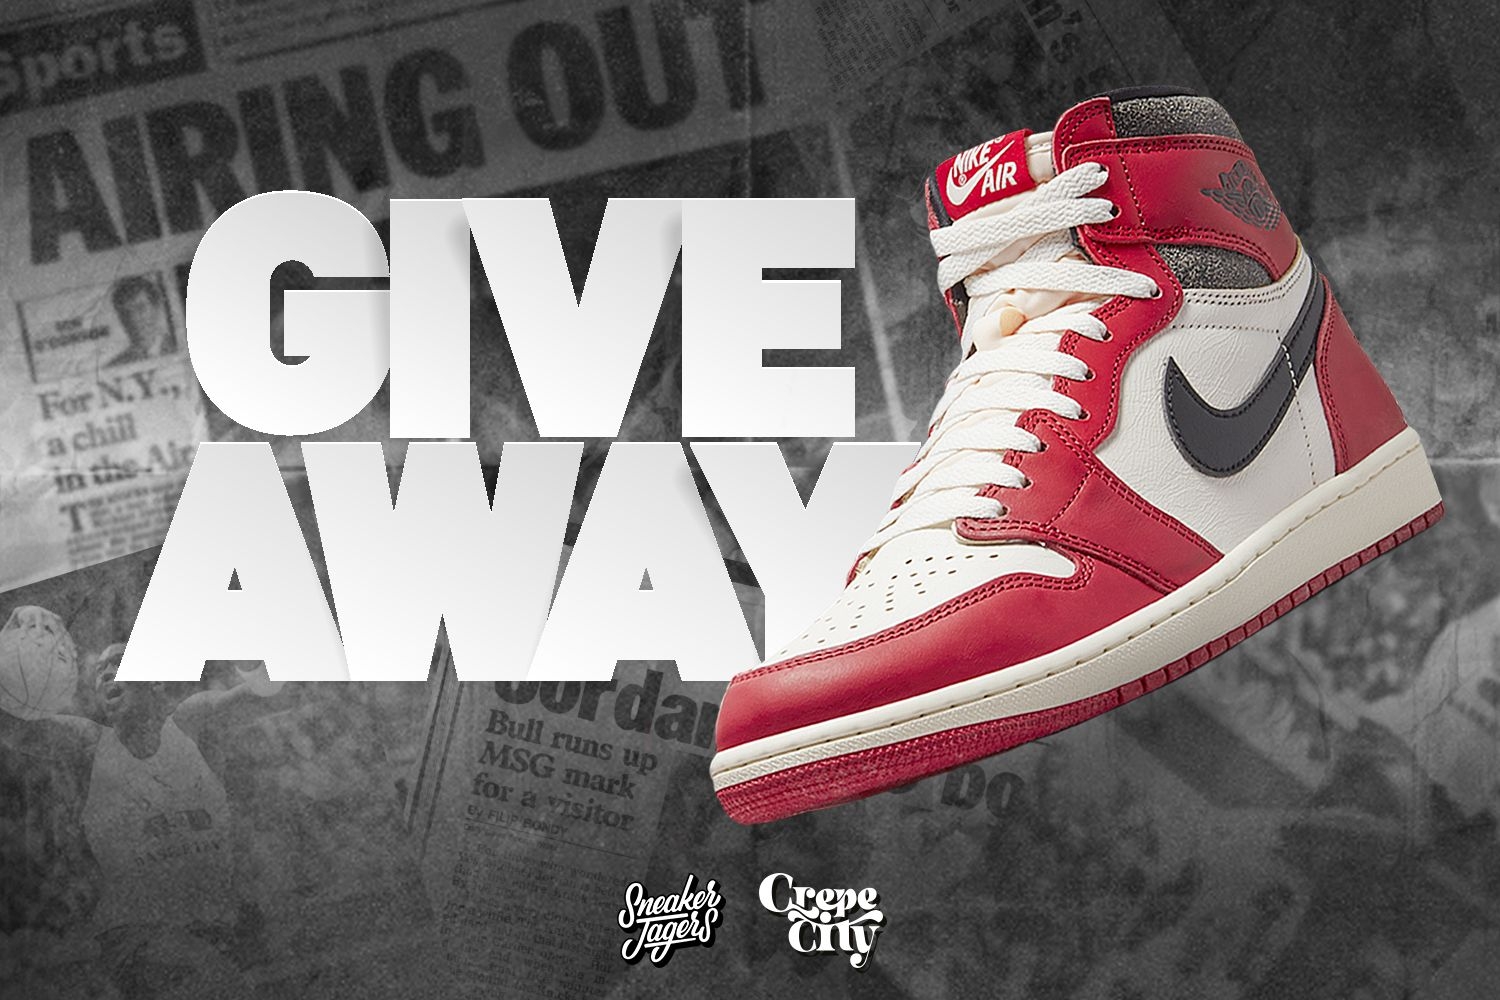 Sneakerjagers and Crepe City present exclusive giveaway